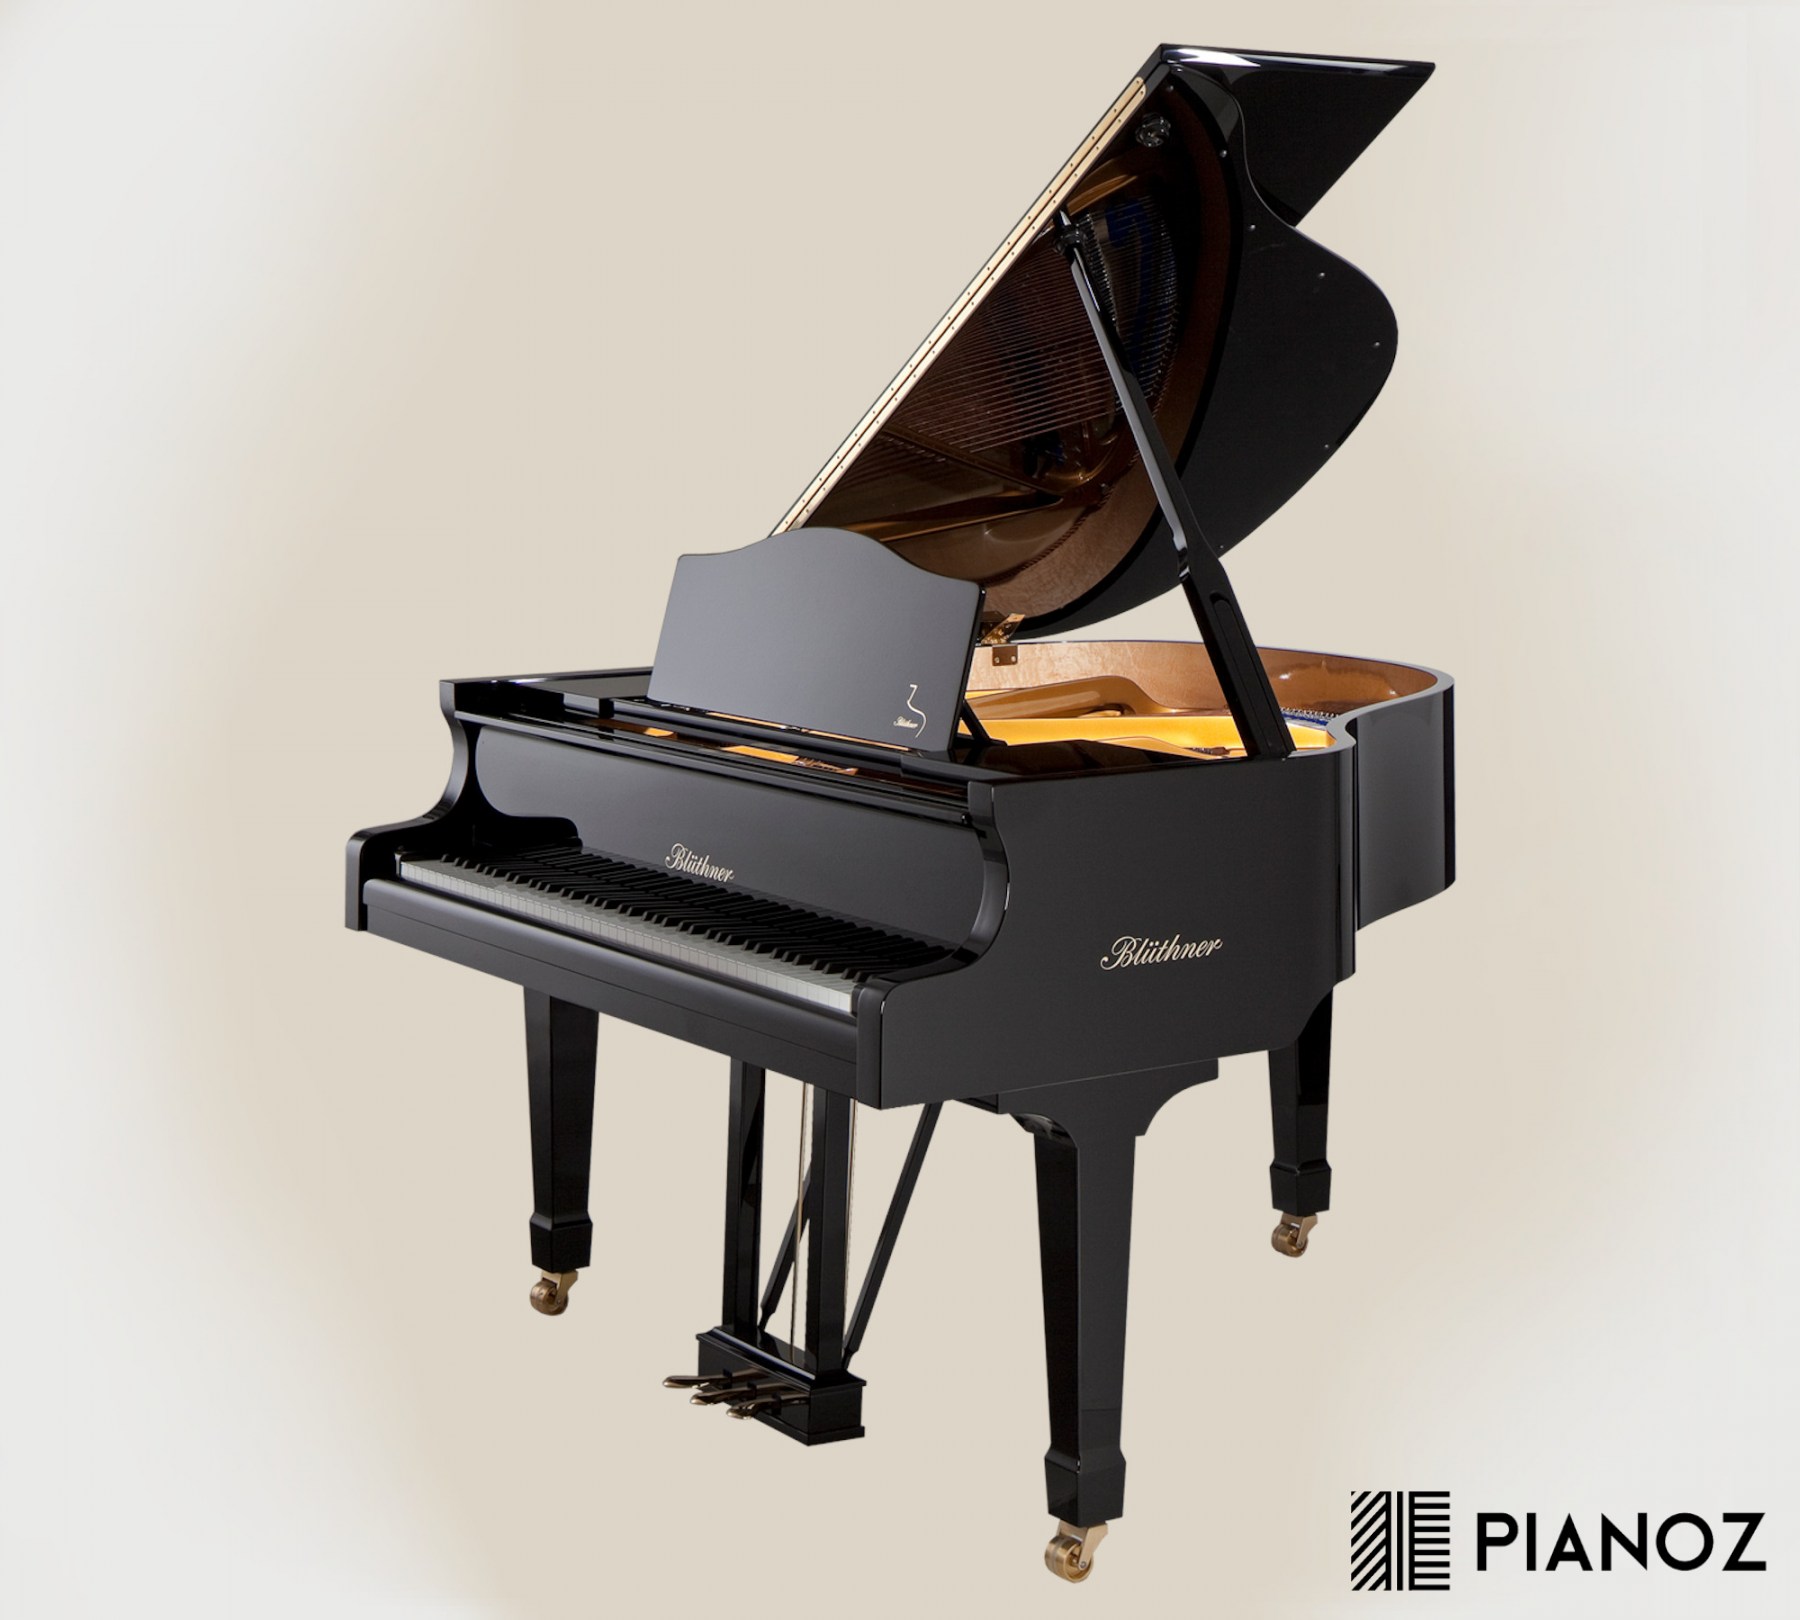 Bluthner  Model 11 - 1984 Baby Grand Piano piano for sale in UK